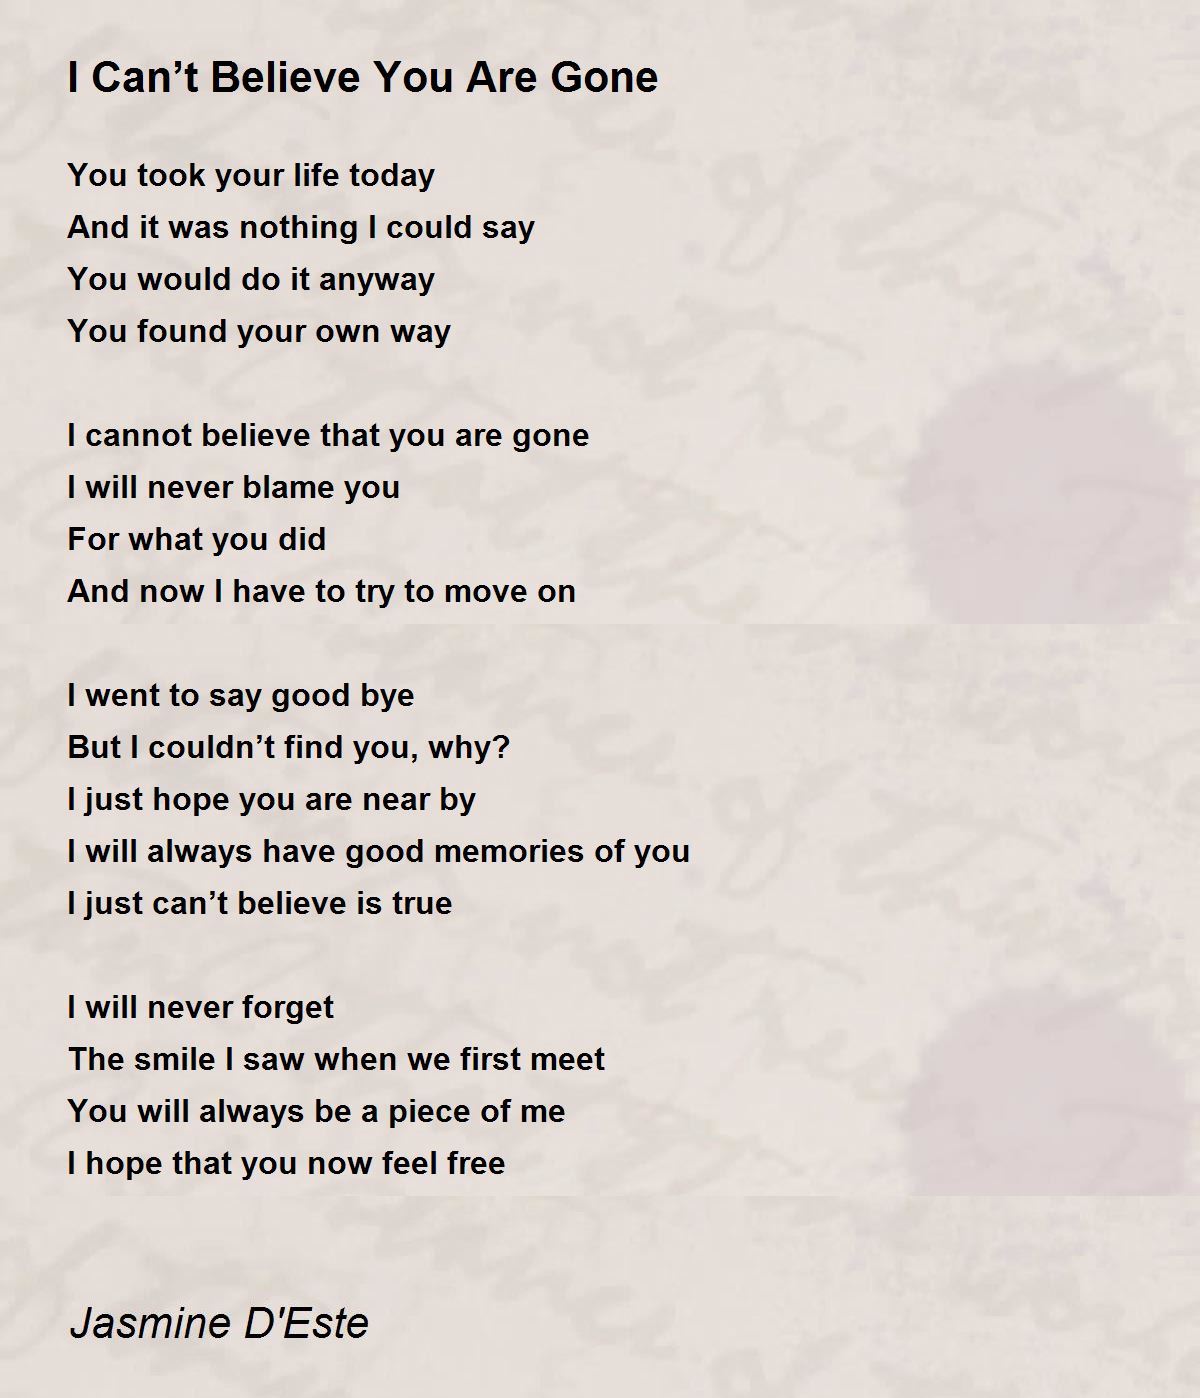 I Can't Believe You Are Gone - I Can't Believe You Are Gone Poem